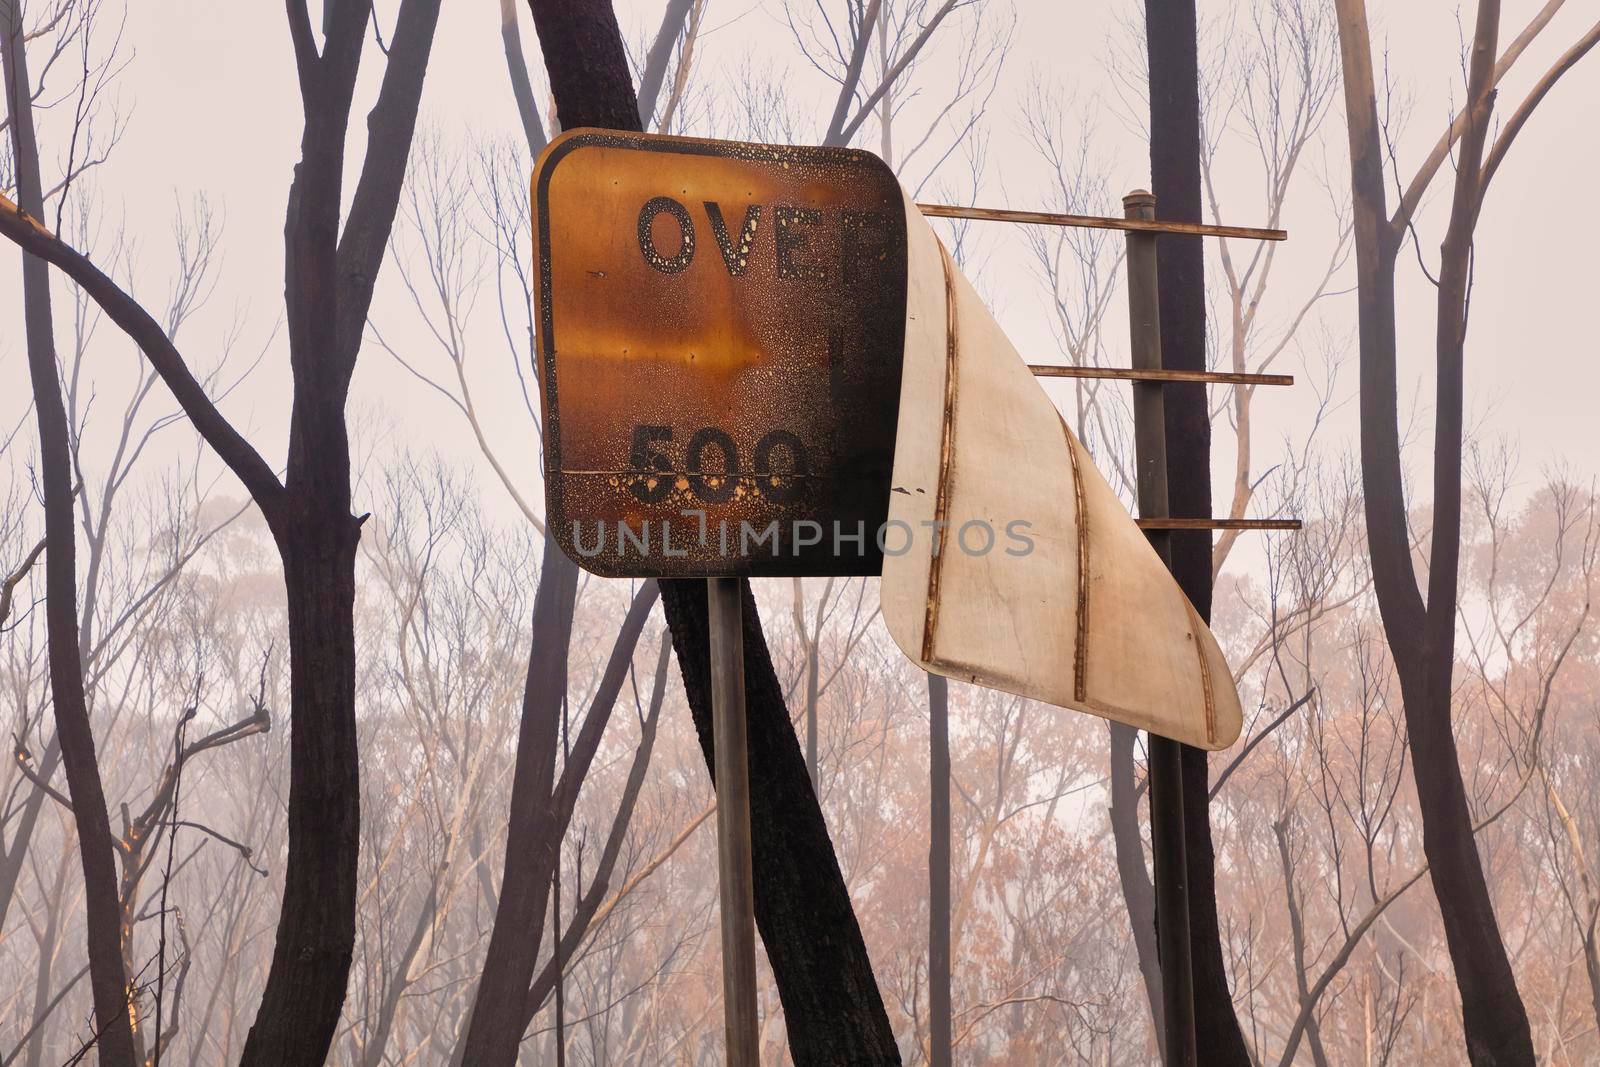 A street sign burnt by bushfire in The Blue Mountains in Australia by WittkePhotos